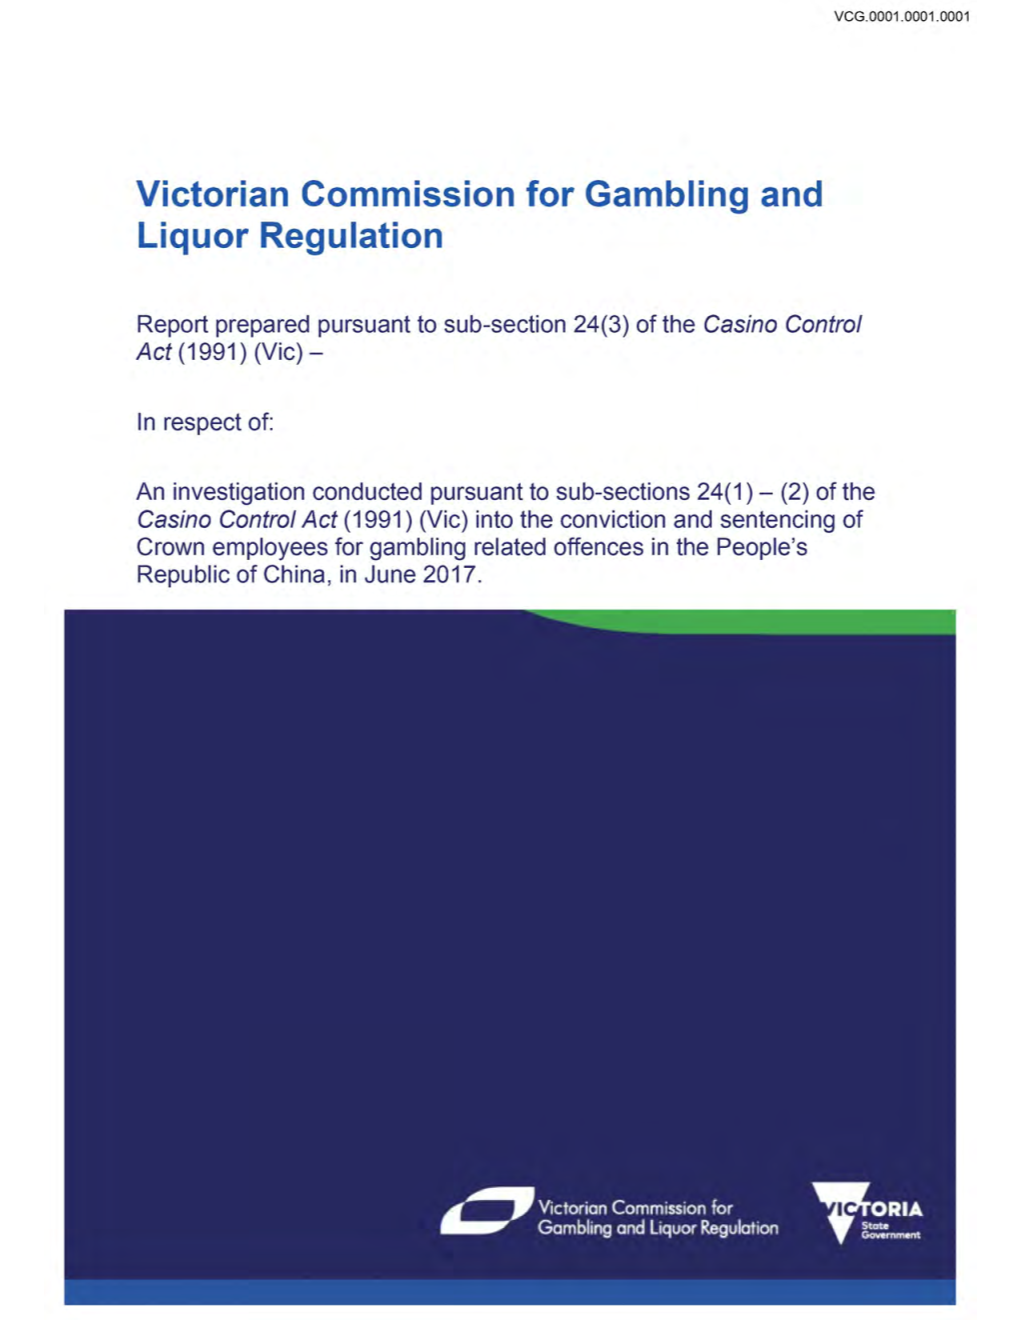 Victorian Commission for Gambling and Liquor Regulation